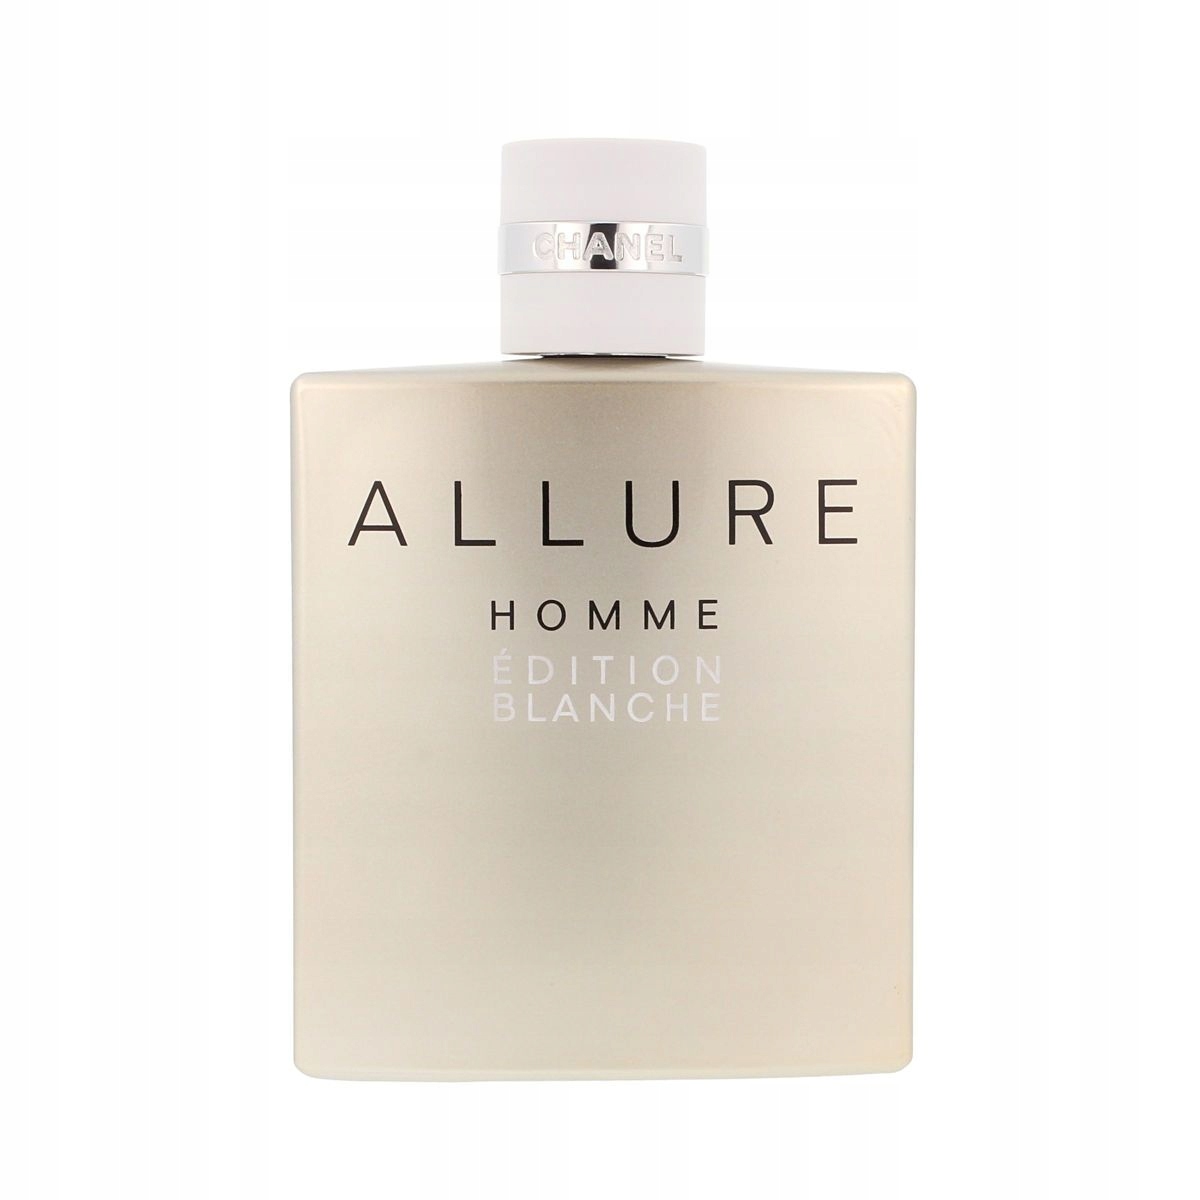 Chanel allure homme blanche. Духи Шанель Аллюр. Шанель Аллюр мужские. Chanel Allure homme Edition Blanche 100ml. Chanel Allure homme Sport Edition Blanche.